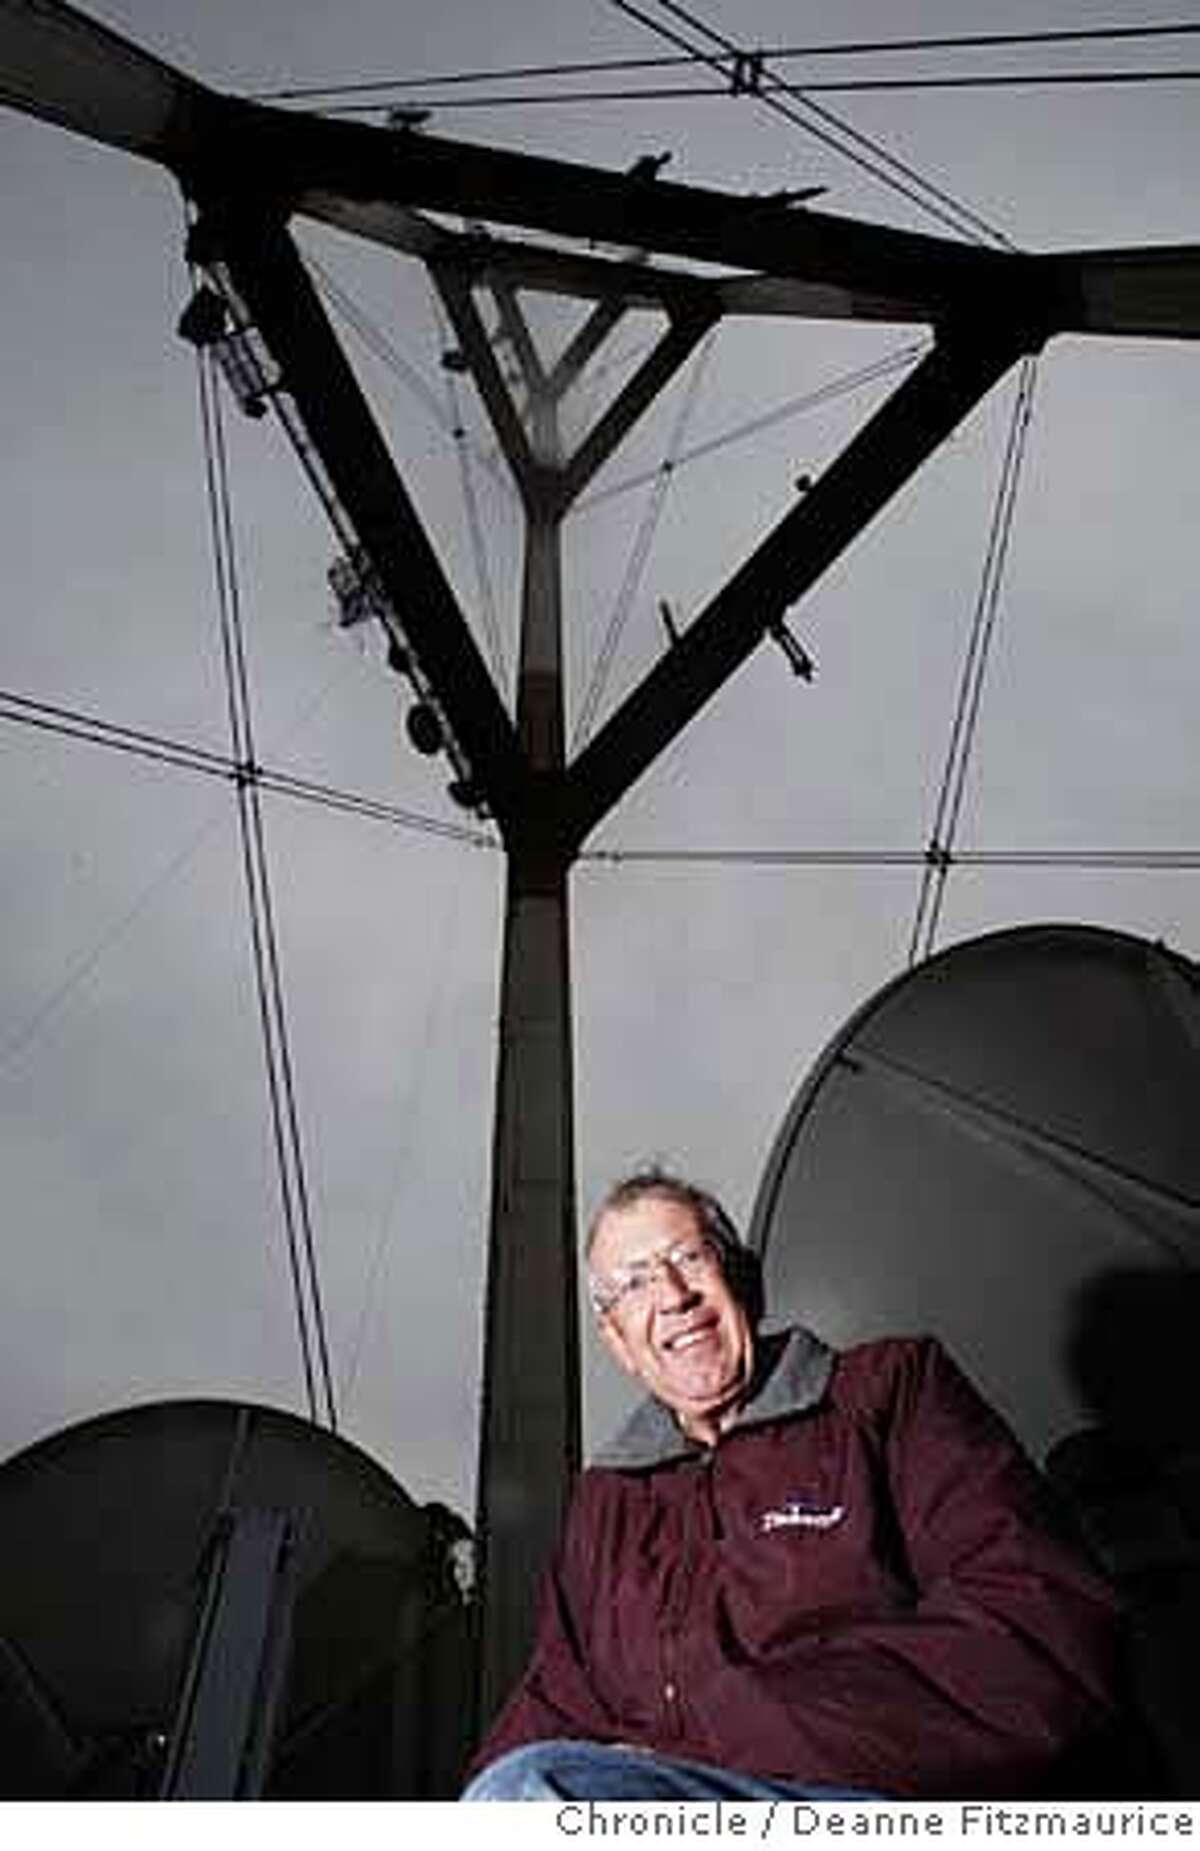 warming15_018_df.jpg Eugene Zastrow (cq), VP, Sutro tower, Inc., is underneath Sutro Tower where Lawrence Livermore scientists have installed probes that gauge how much greenhouse gasses we are releasing into the atmosphere. Photographed in San Francisco on 10/12/07. Deanne Fitzmaurice / The Chronicle Mandatory credit for photographer and San Francisco Chronicle. No Sales/Magazines out.